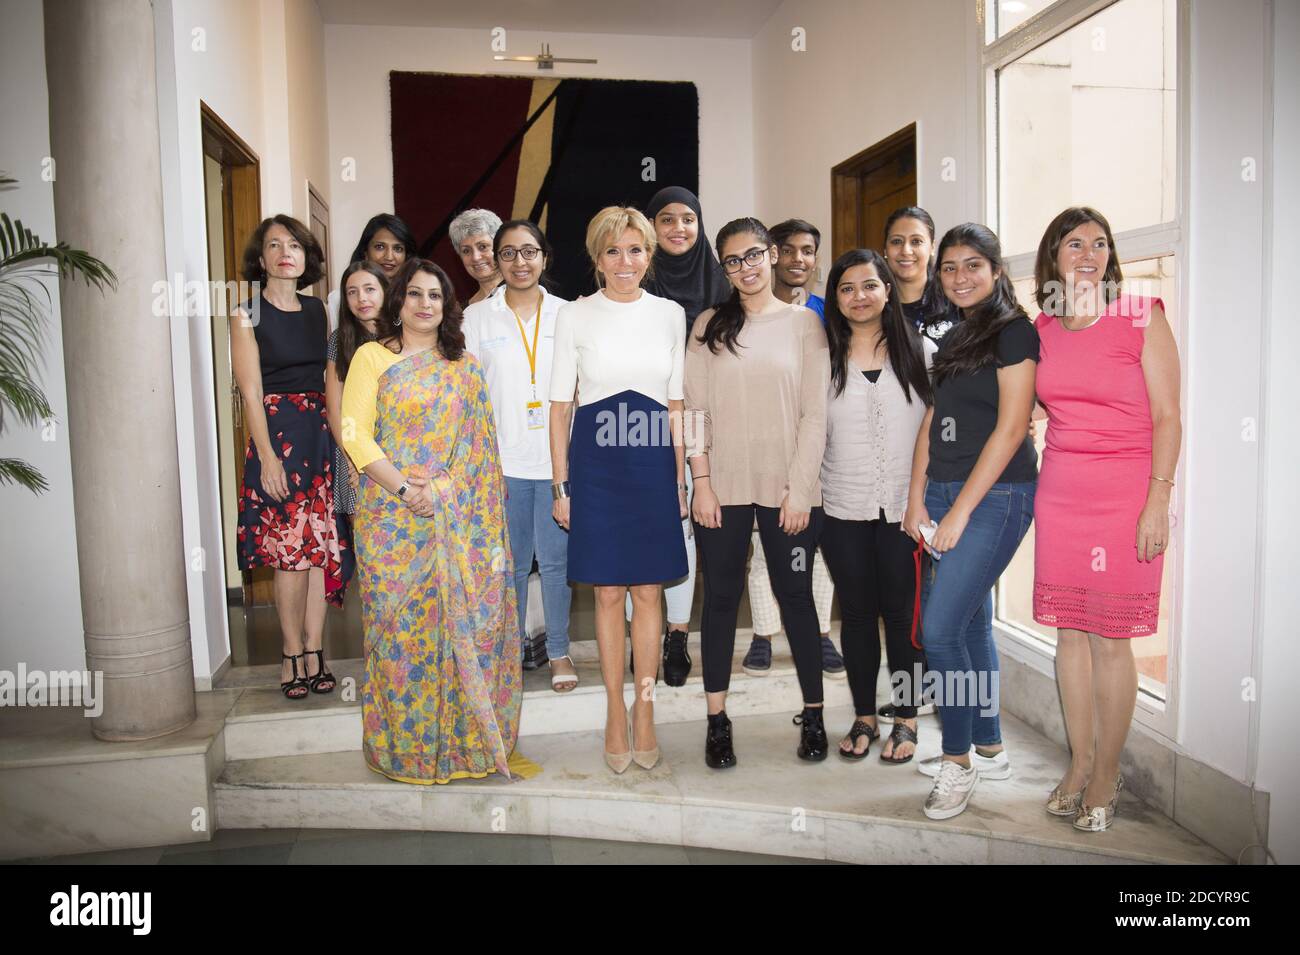 French First Lady Brigitte Macron during a meeting organized with UNICEF at the French Embassy, New Delhi, India On March 11,2018. Photo by Eliot Blondet/ABACAPRESS. COM Madame Brigitte Macron lors d 'une rencontre organisée par L 'unicef à l 'ambassade de France, New Delhi, India On March 11, 2018. Photo by Eliot Blondet/ABACAPRESS.COM Stock Photo